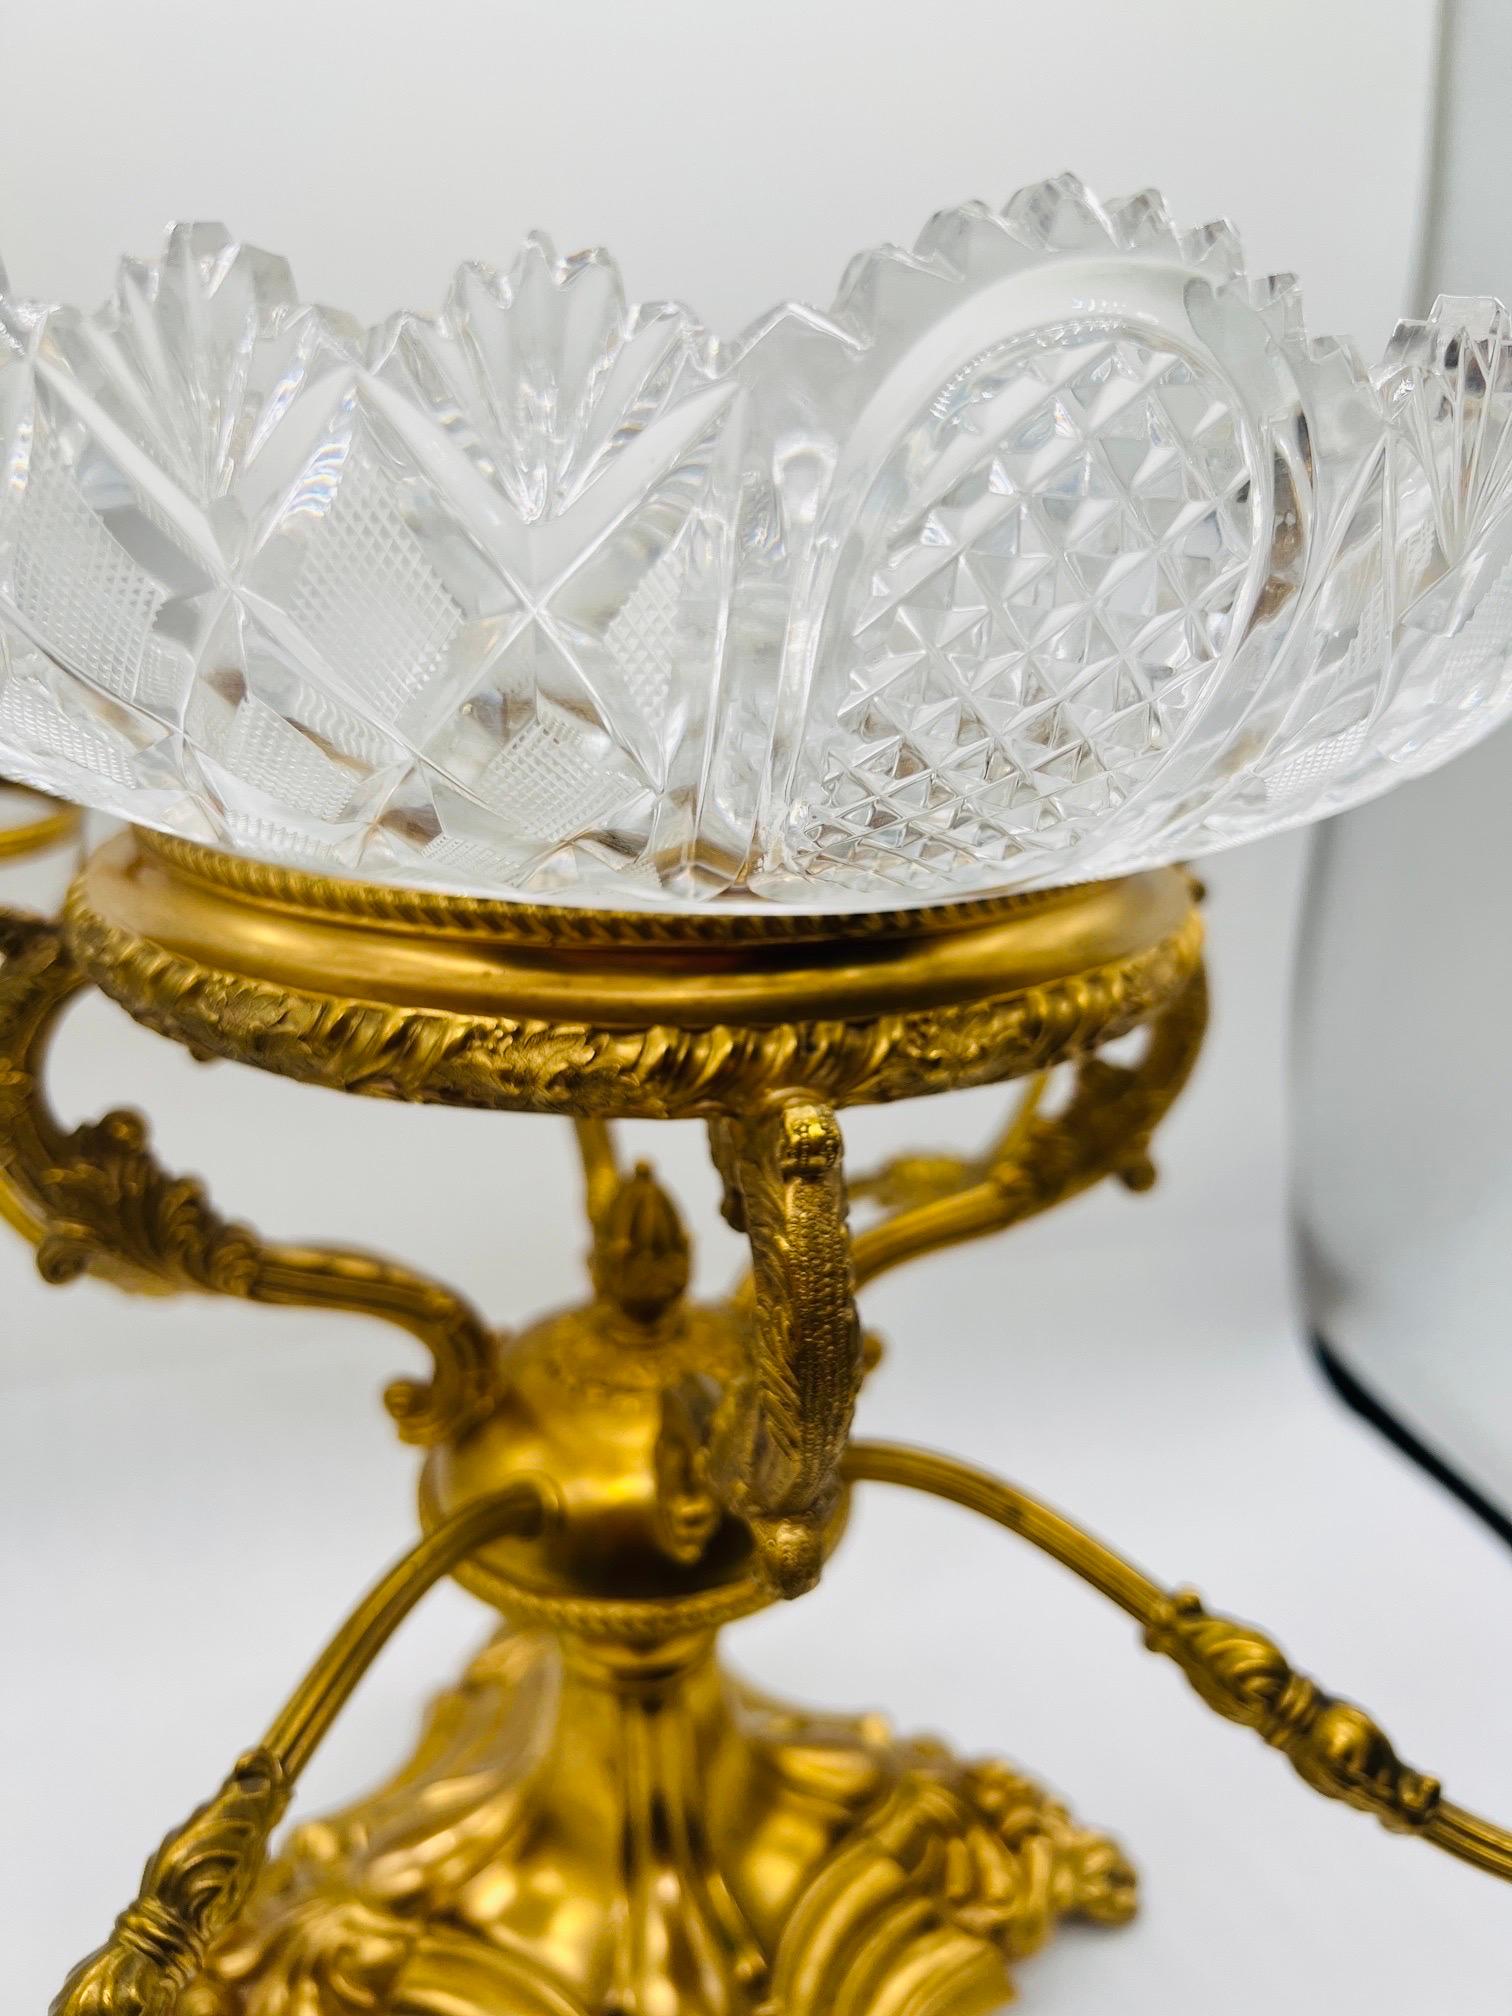 Silver Plate English Sheffield Gilt Plated William IV Style Cut Glass Epergne or Centerpiece For Sale